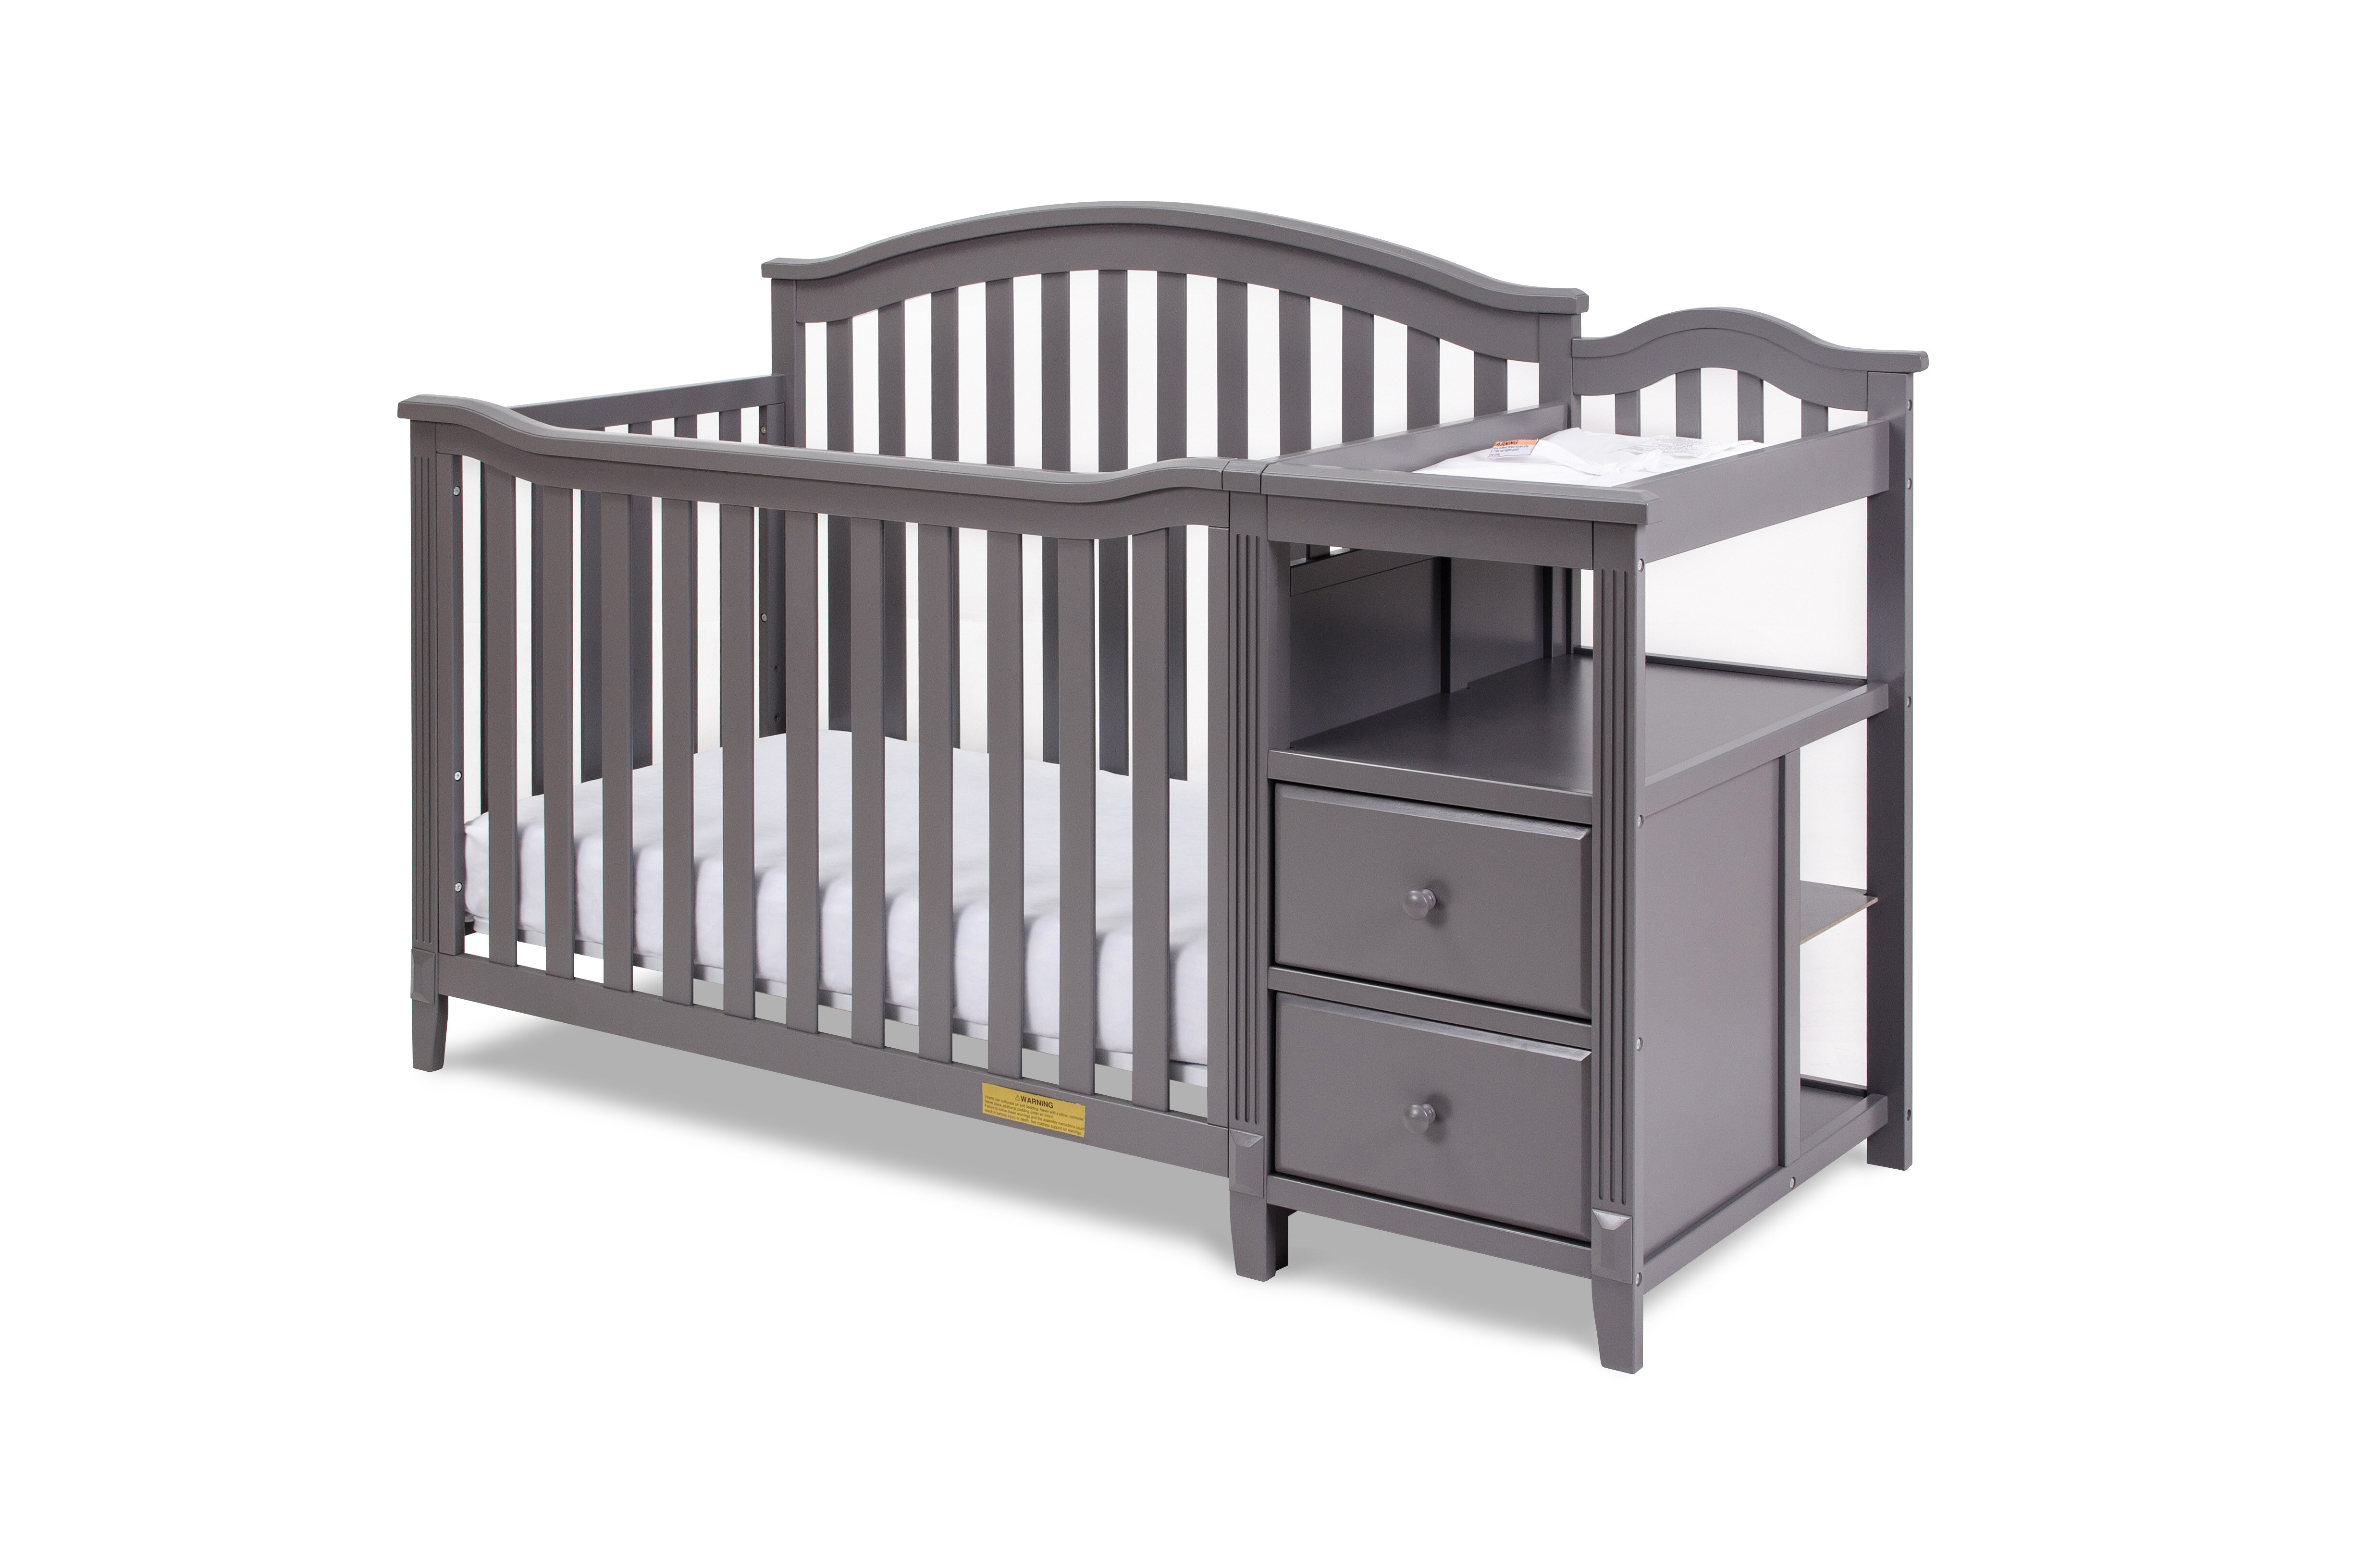 Black Baby Cribs With Changing Table Attached Cheap Online